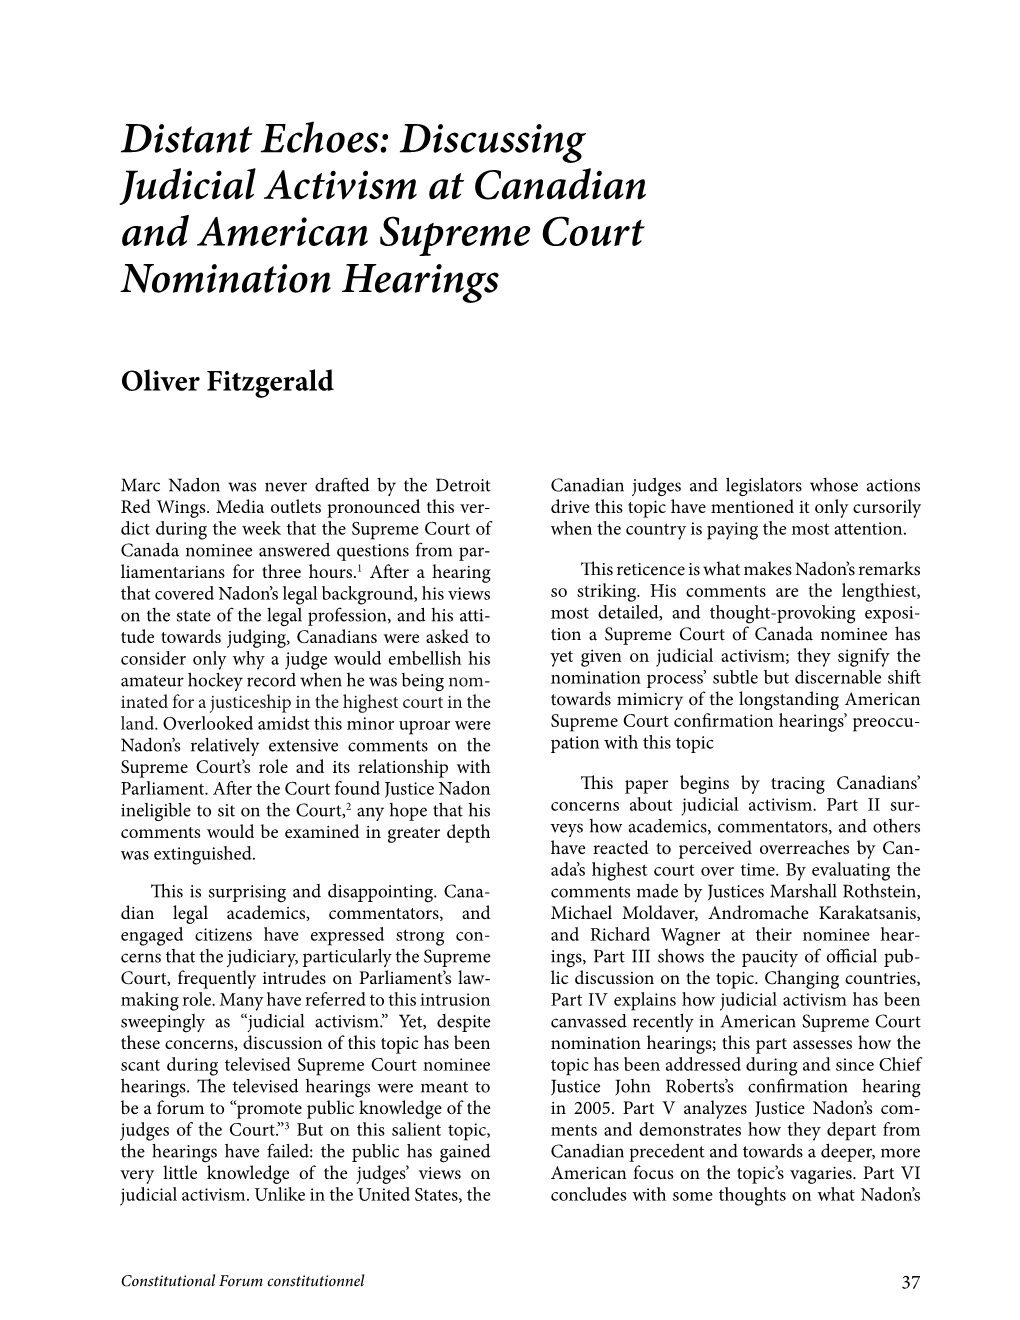 Distant Echoes: Discussing Judicial Activism at Canadian and American Supreme Court Nomination Hearings